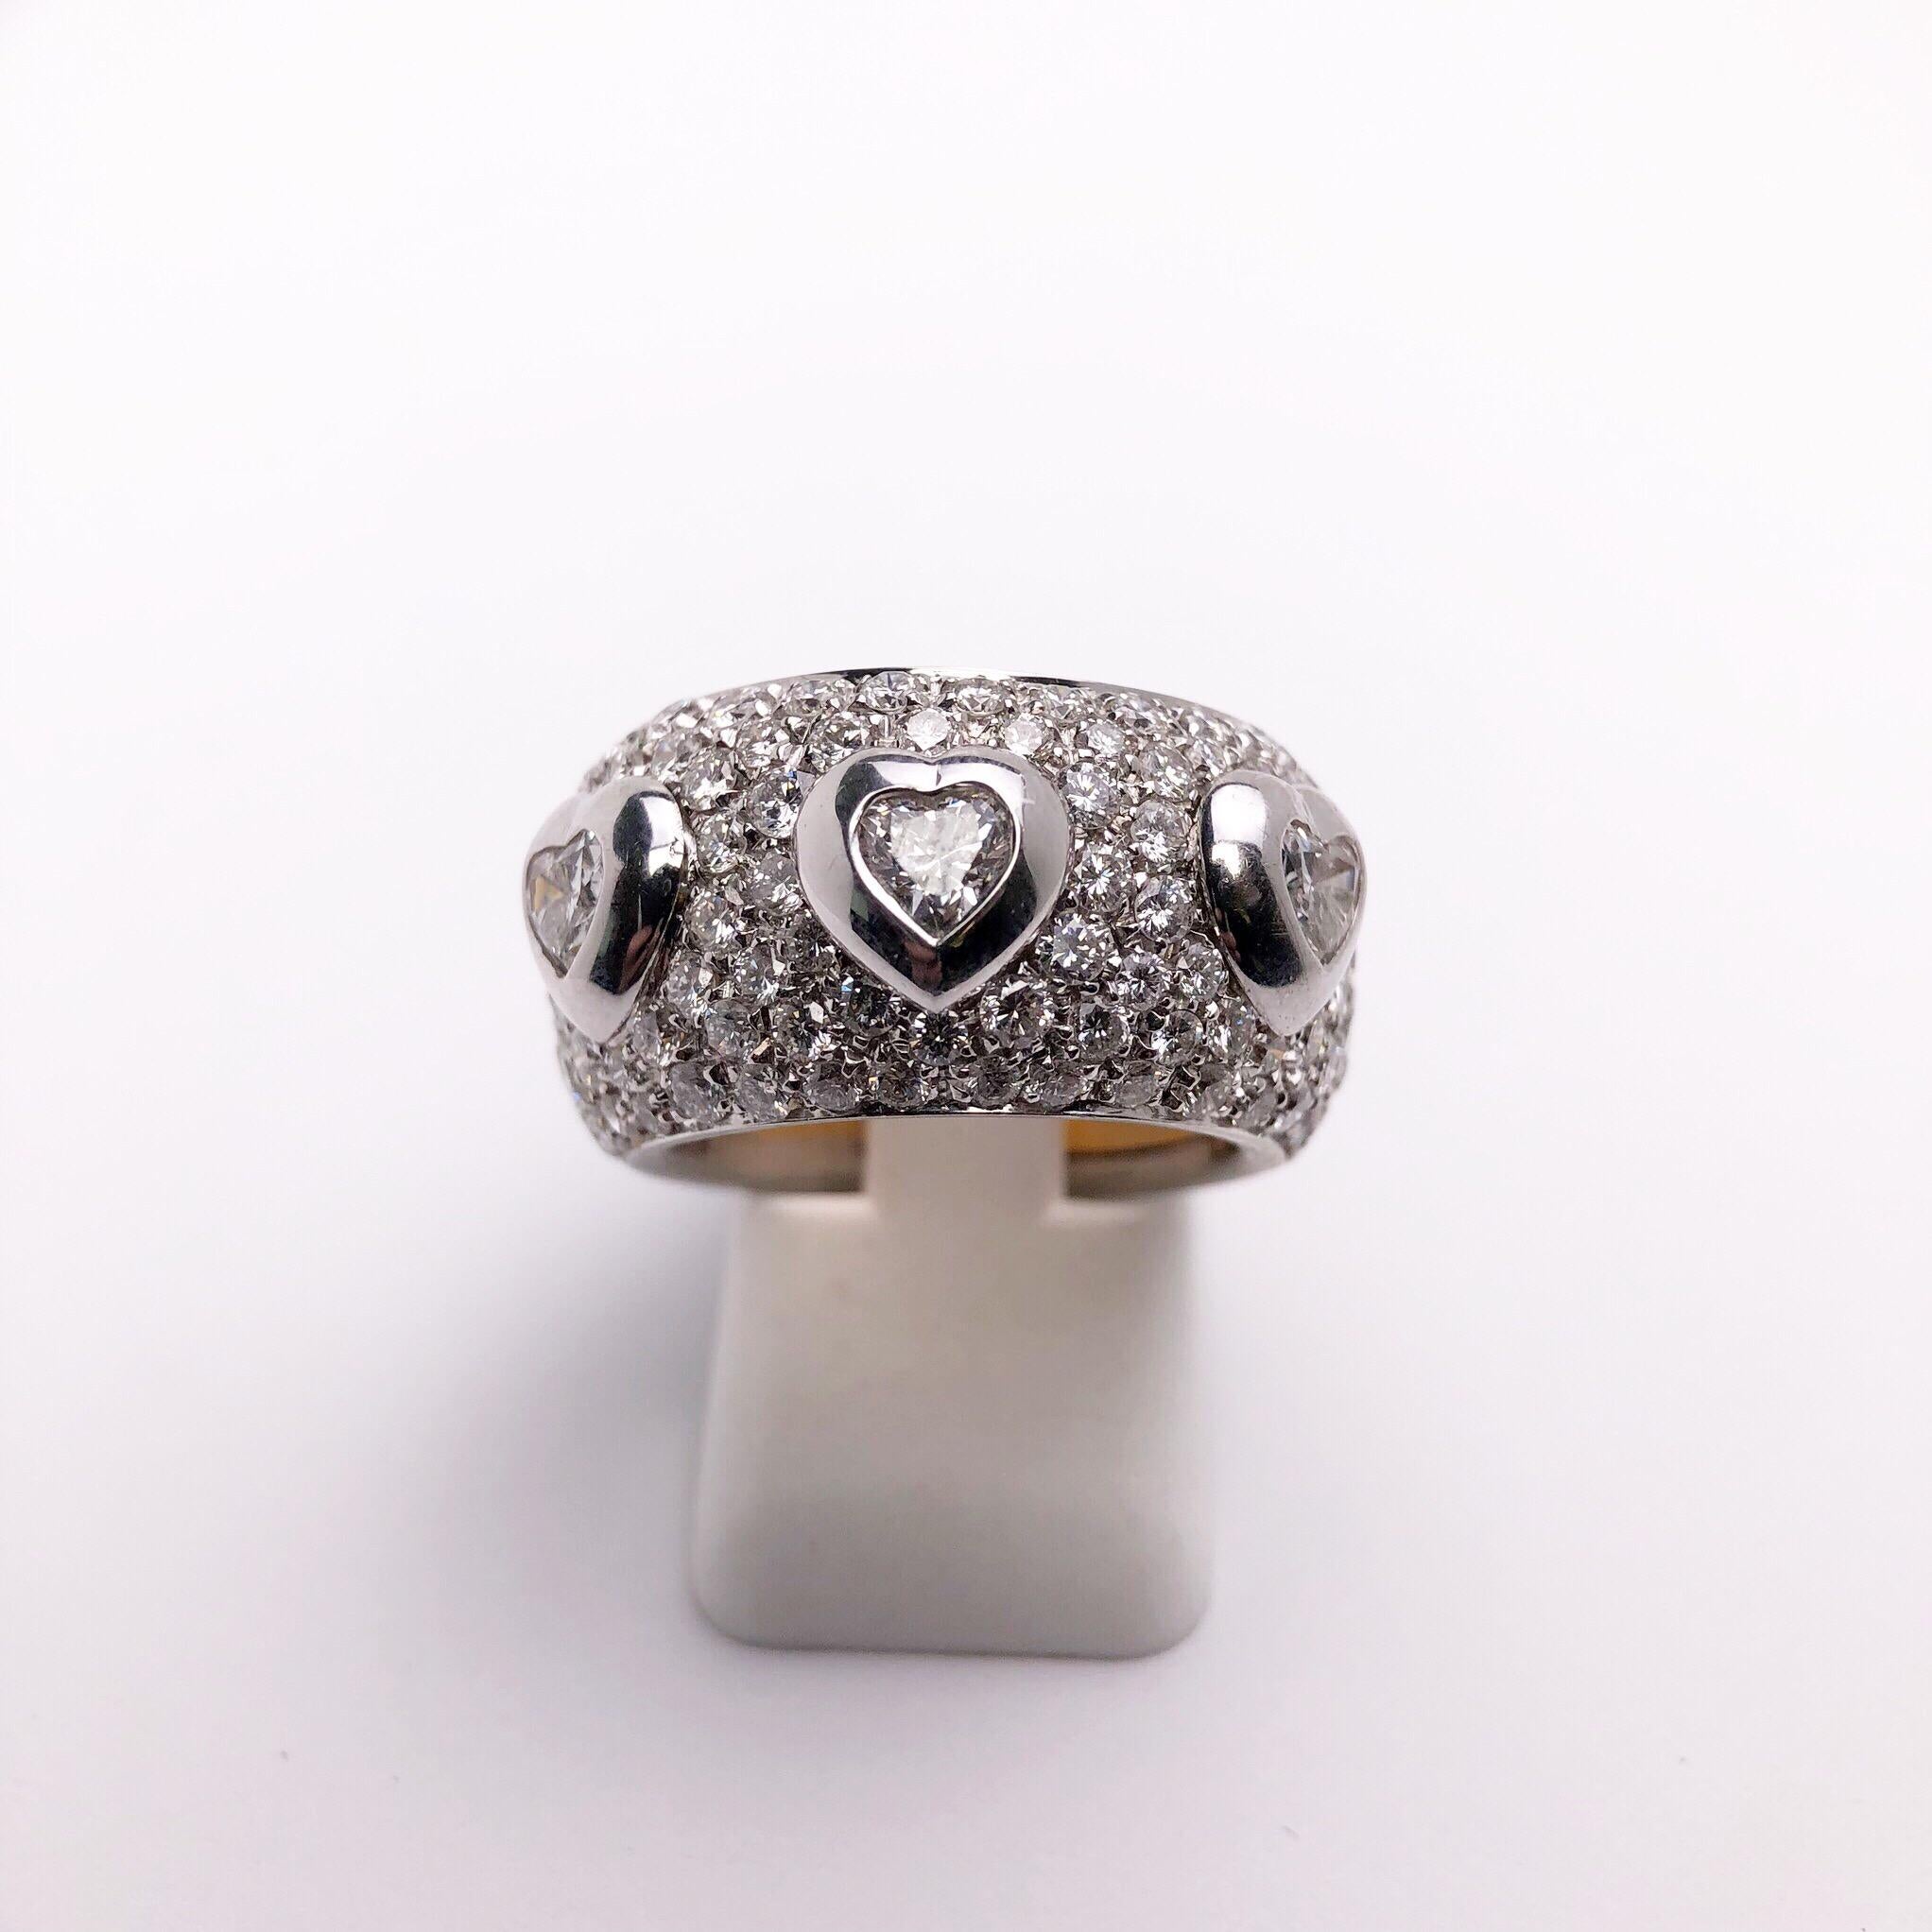 Cellini Jewelers 18 Karat White Gold, 3.39 Carat Diamond Hearts Ring In New Condition For Sale In New York, NY